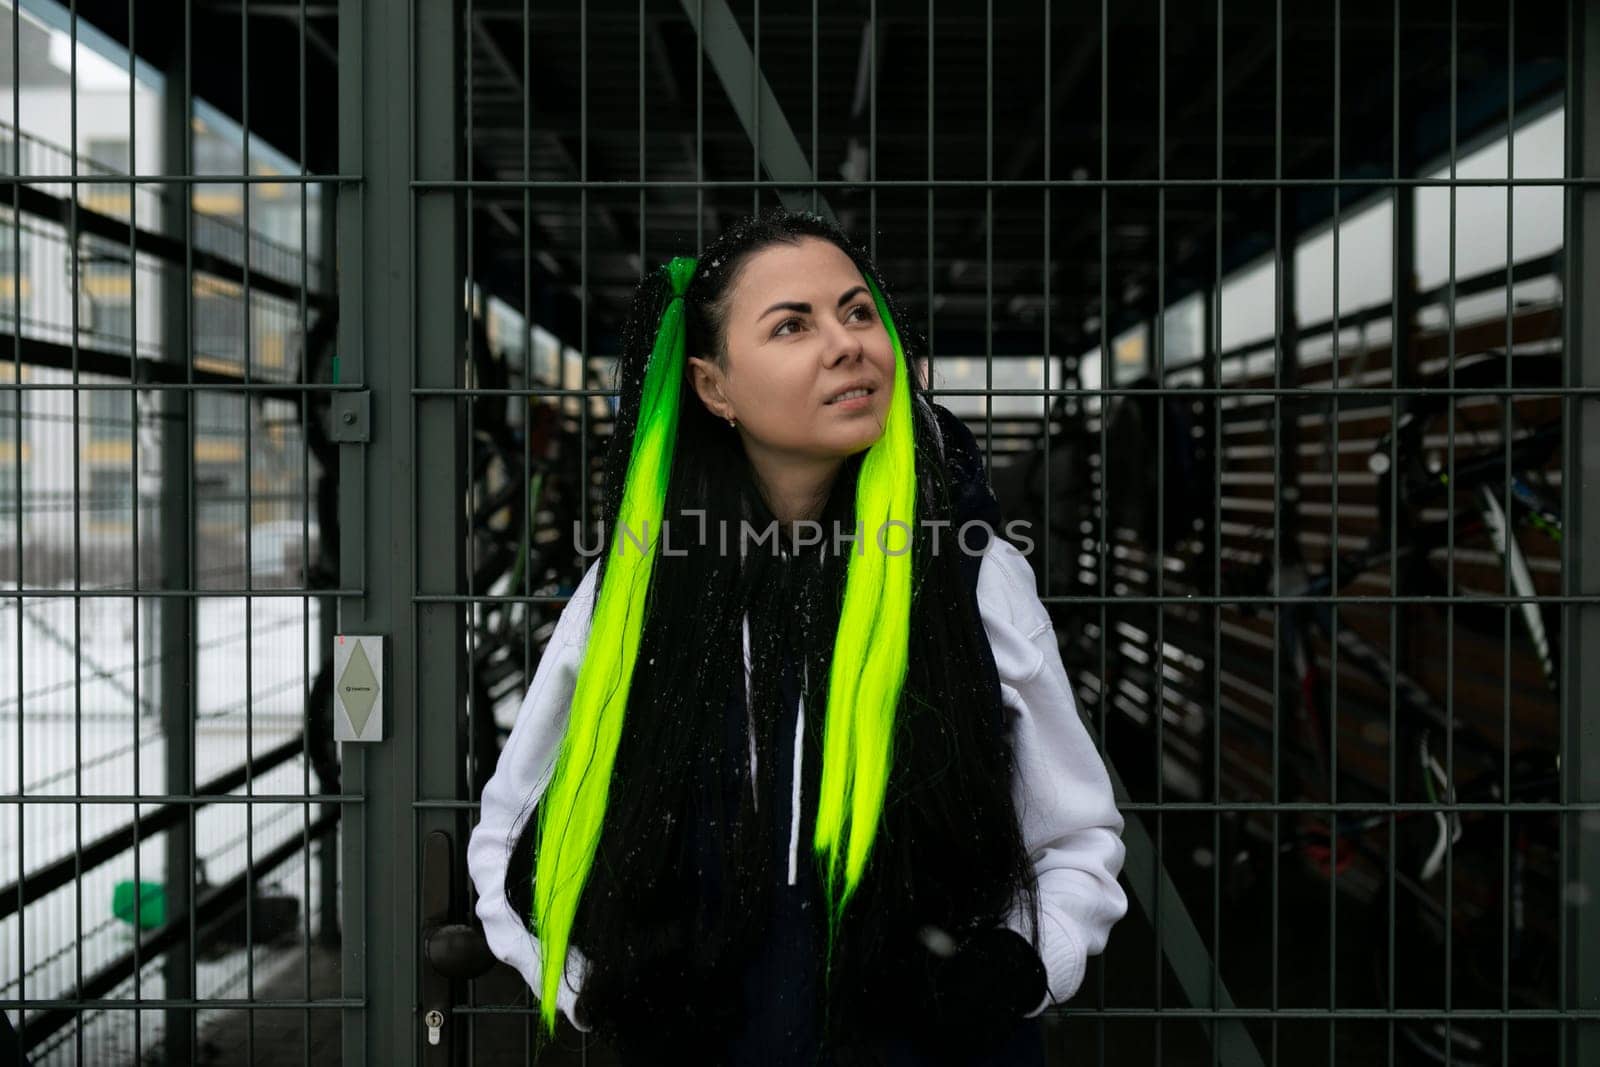 A woman with bright green hair stands confidently in front of a rustic wooden fence, her striking appearance contrasting with the natural surroundings. She gazes directly at the viewer, exuding a sense of strength and individuality.